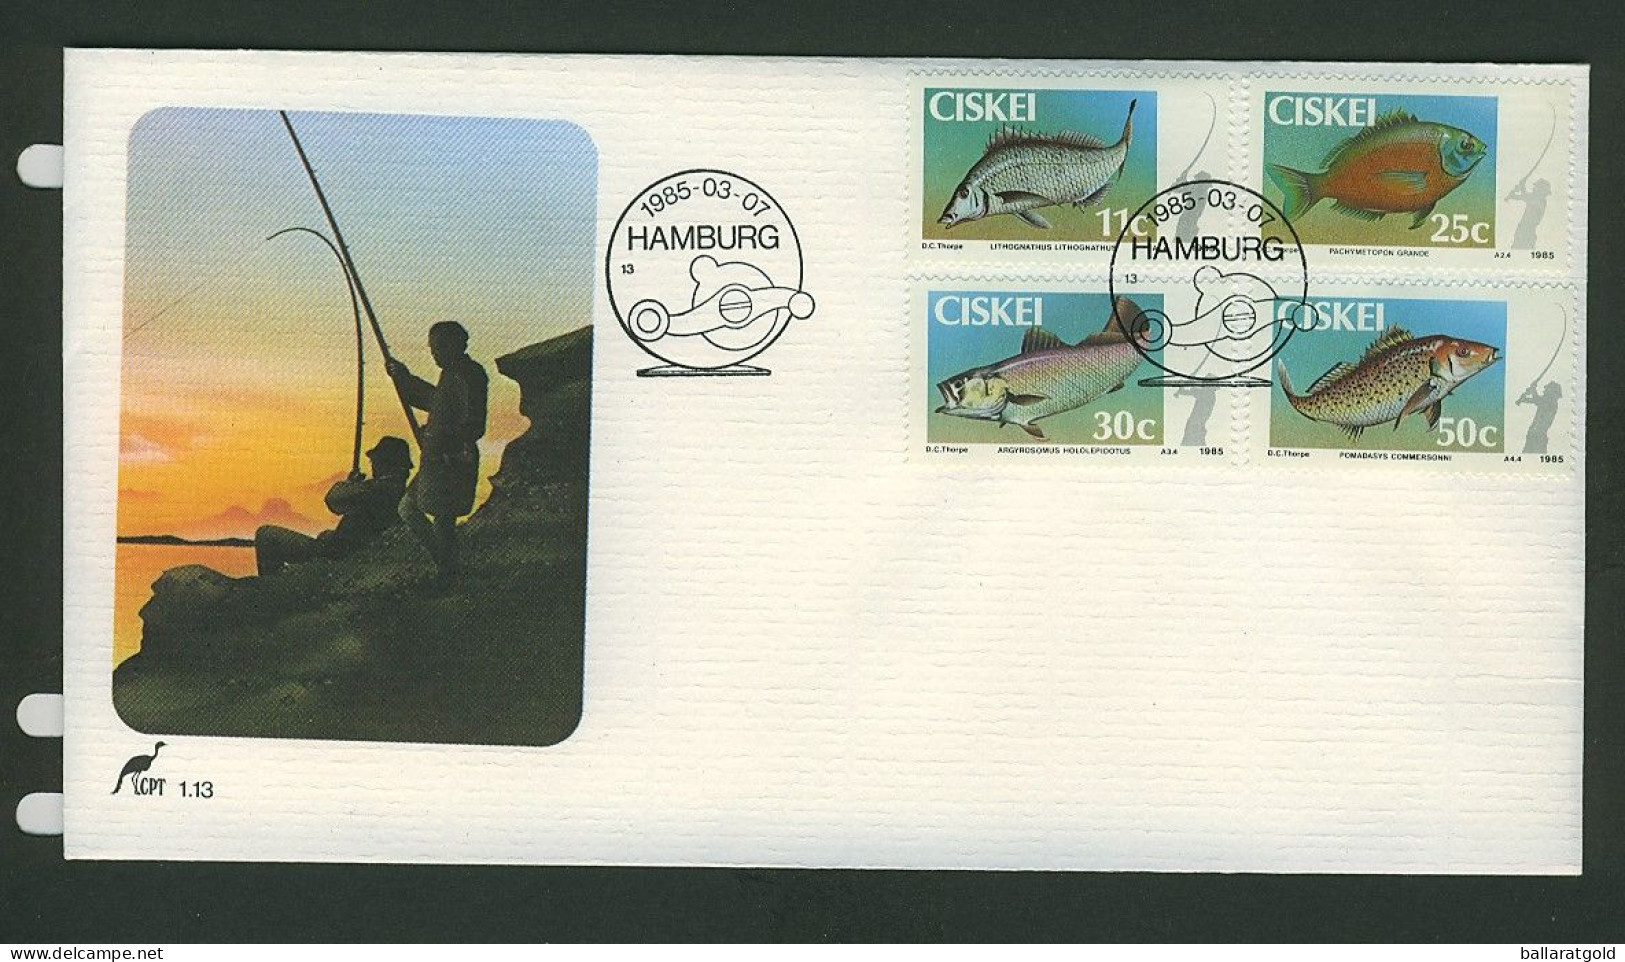 Ciskei 1985 Fishing First Day Cover 1.13 - Ciskei